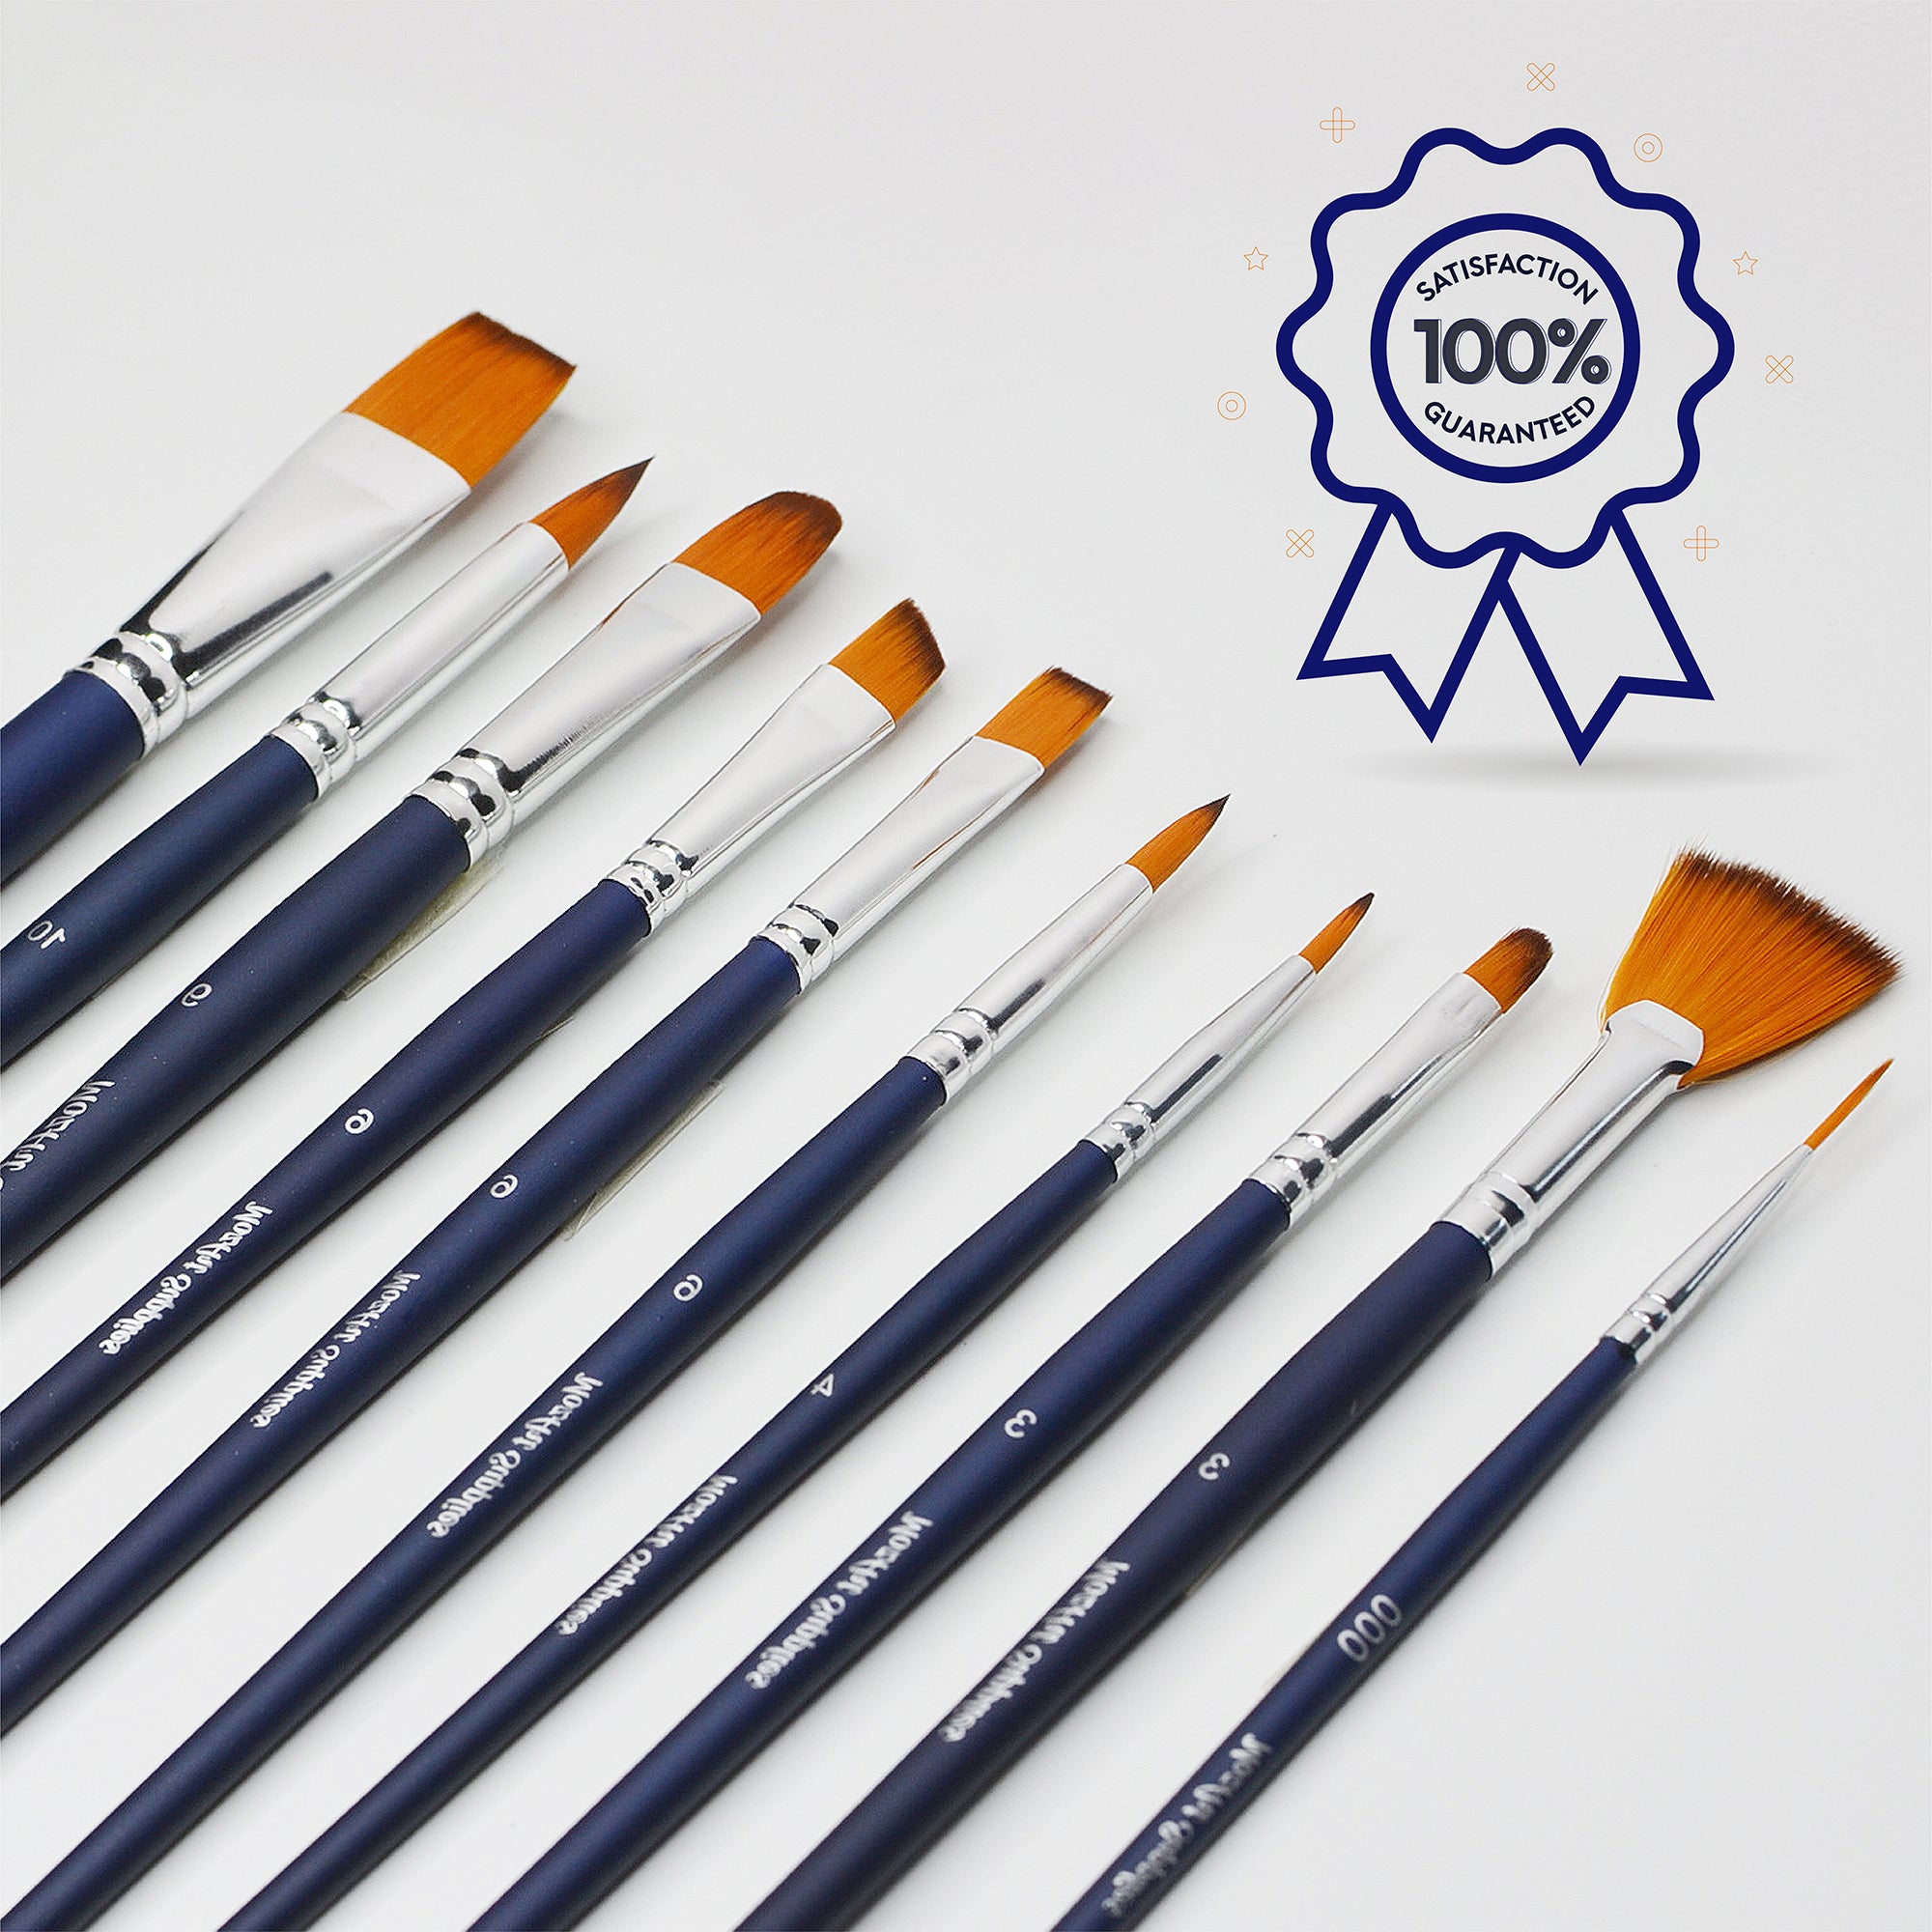 Kids Paint Brushes, W: 15 mm, 60 pc